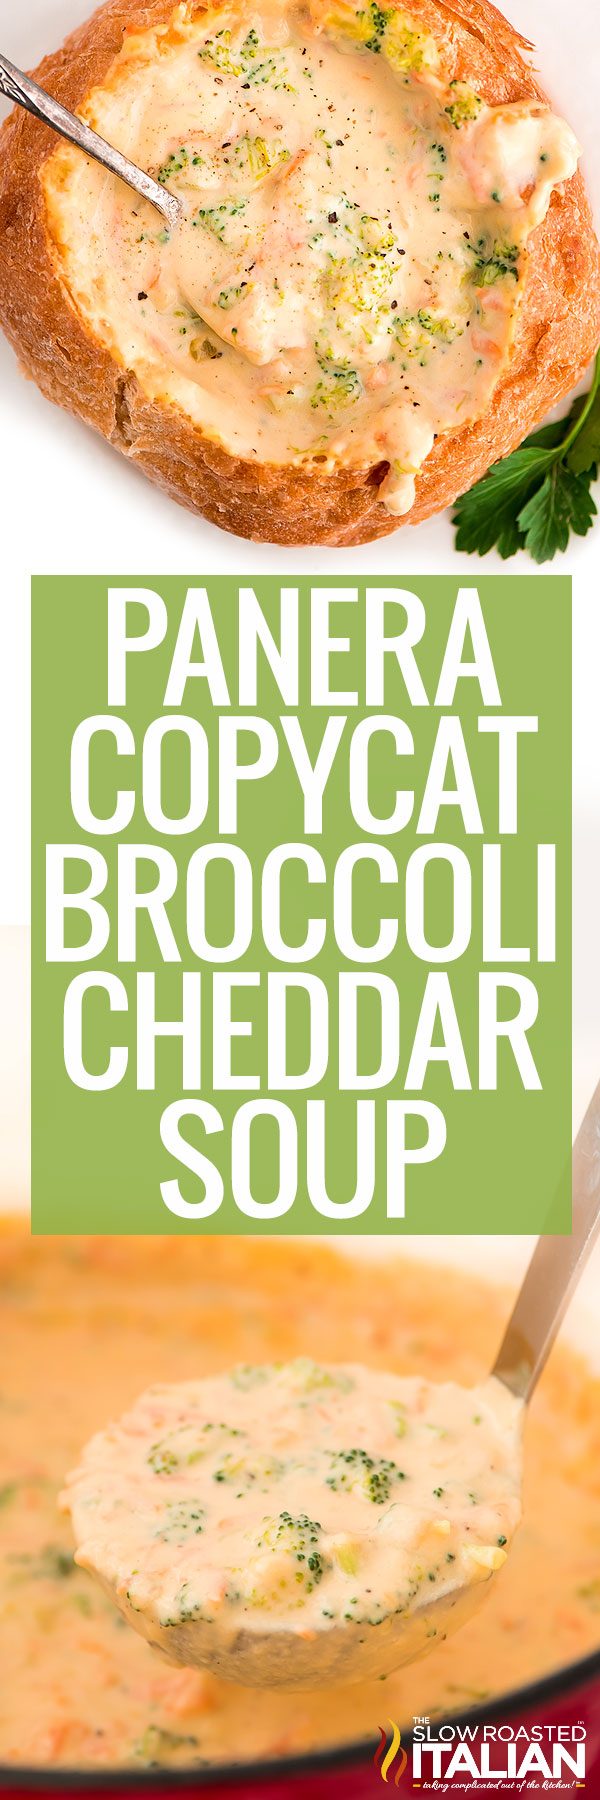 titled photo (and shown in bread bowl): Panera Copycat Broccoli Cheddar Soup